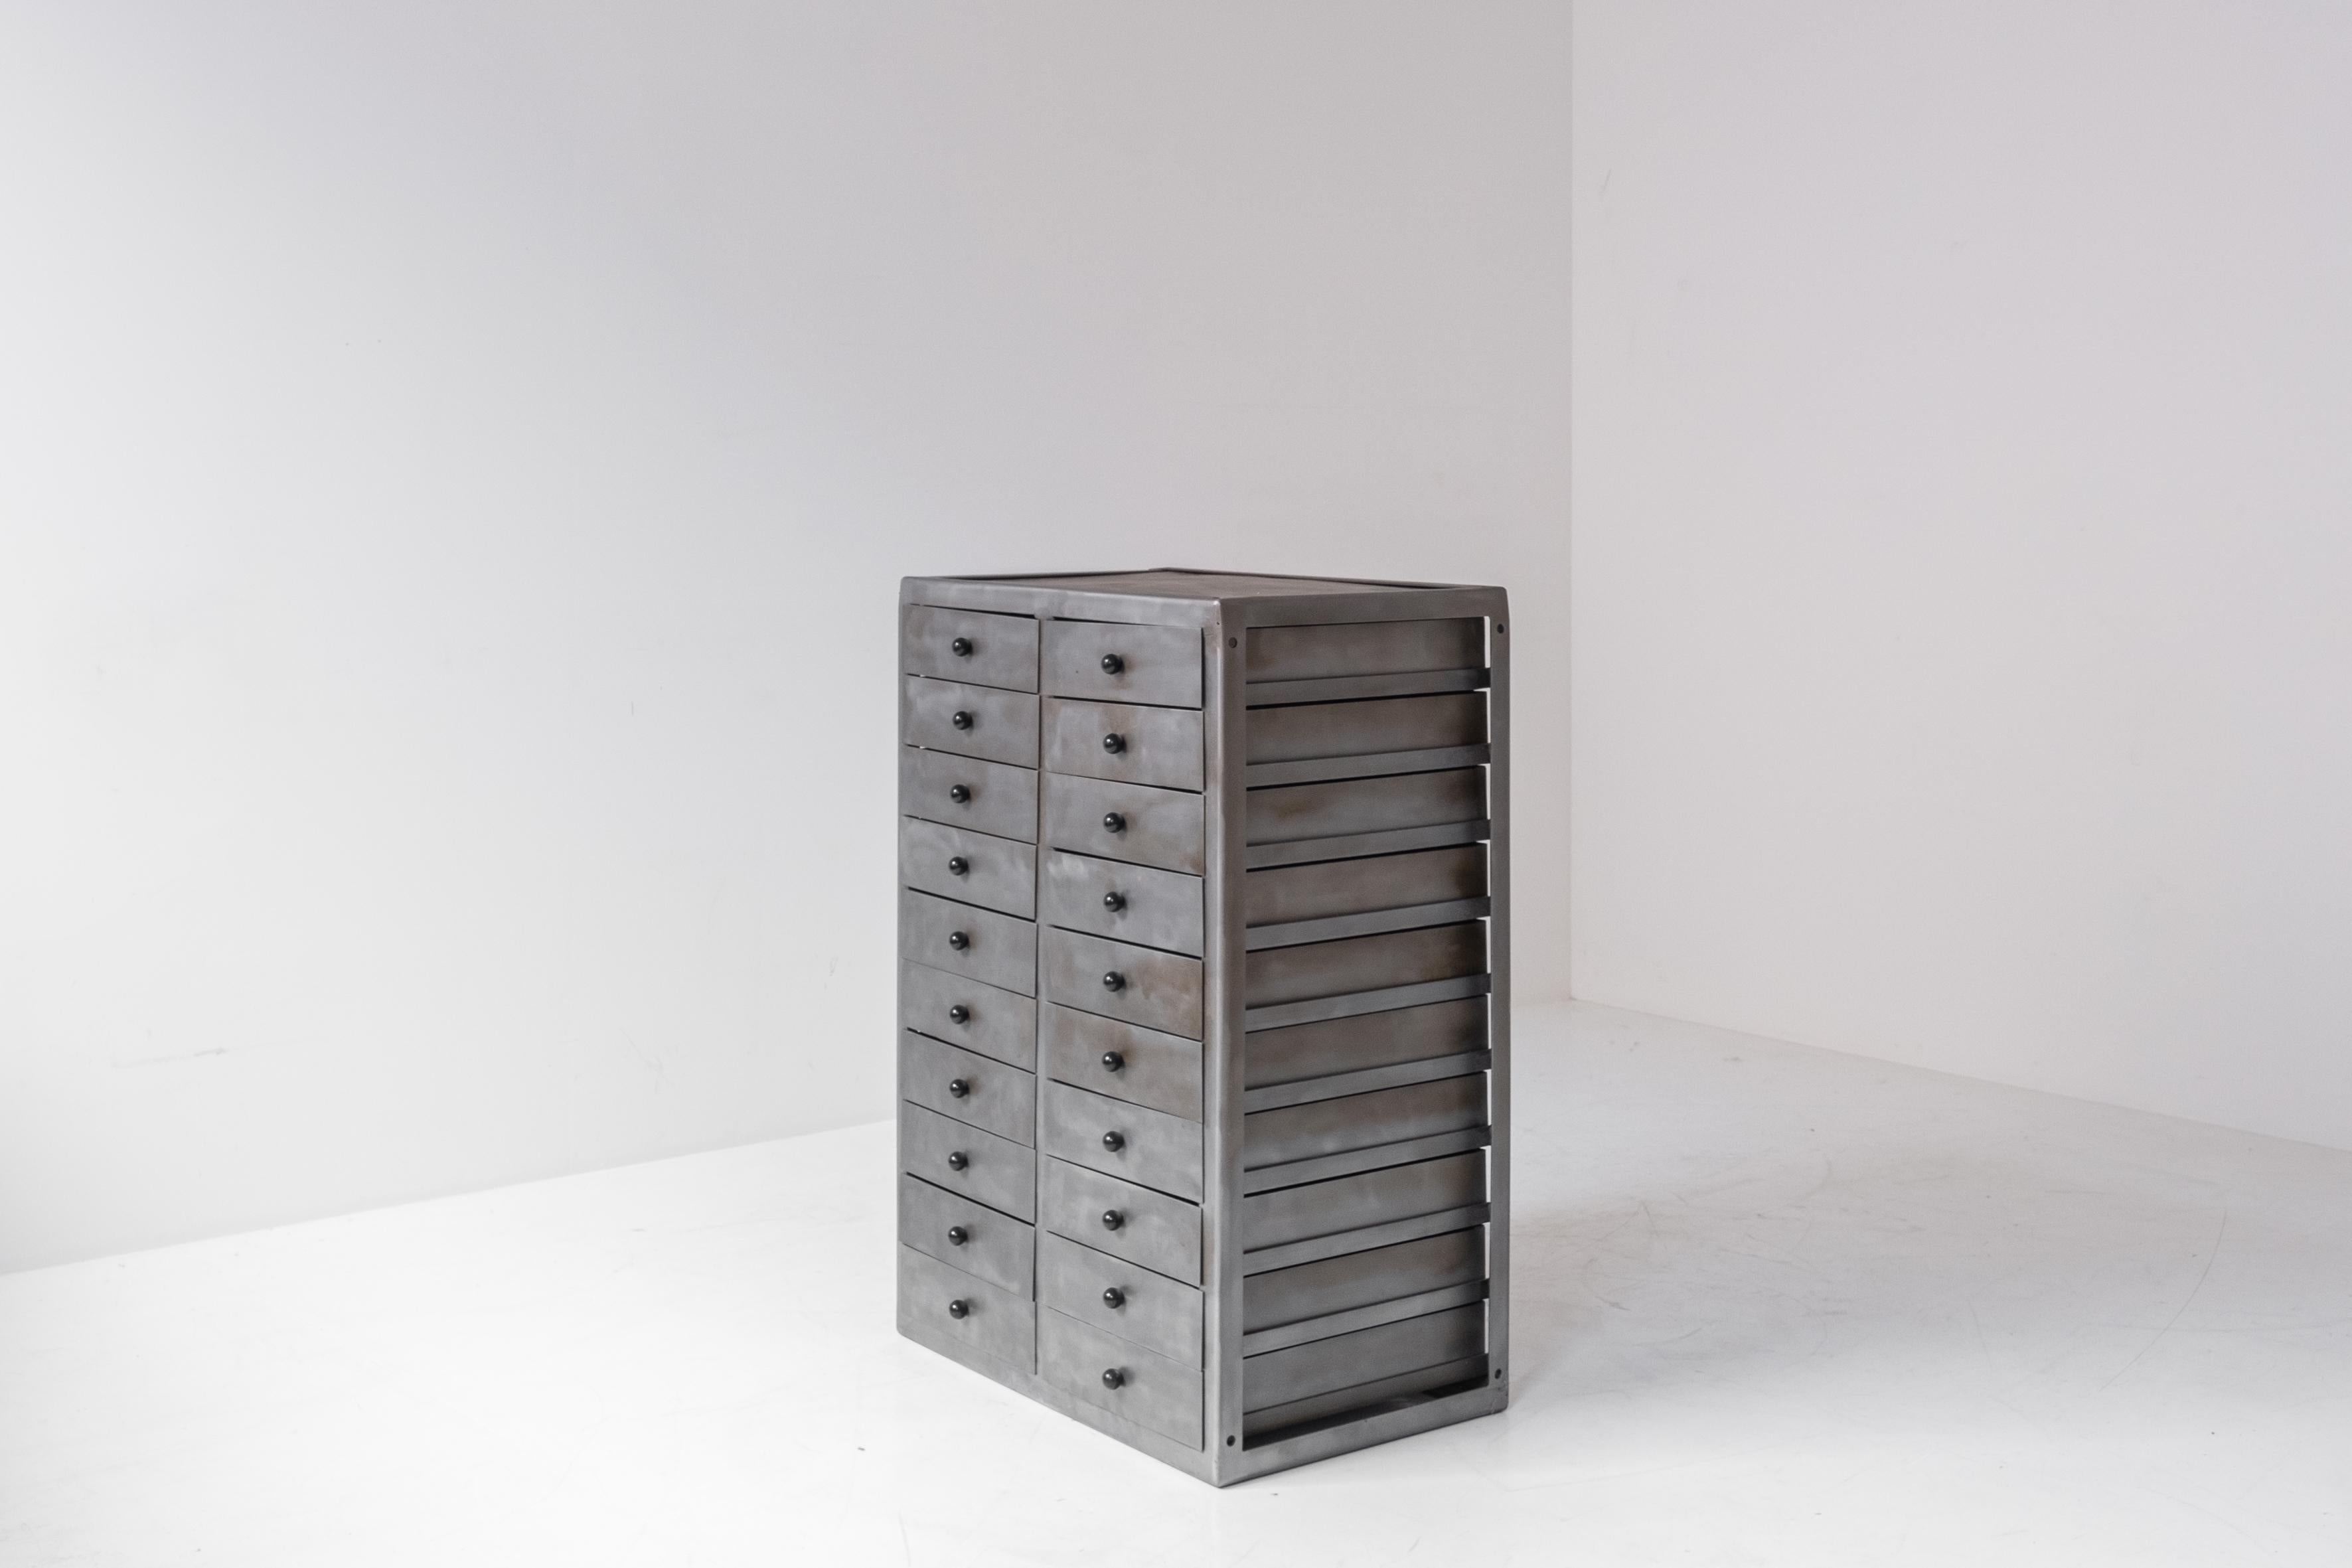 Steel Industrial Chest of Drawers Designed in the Netherlands Around the 1960s